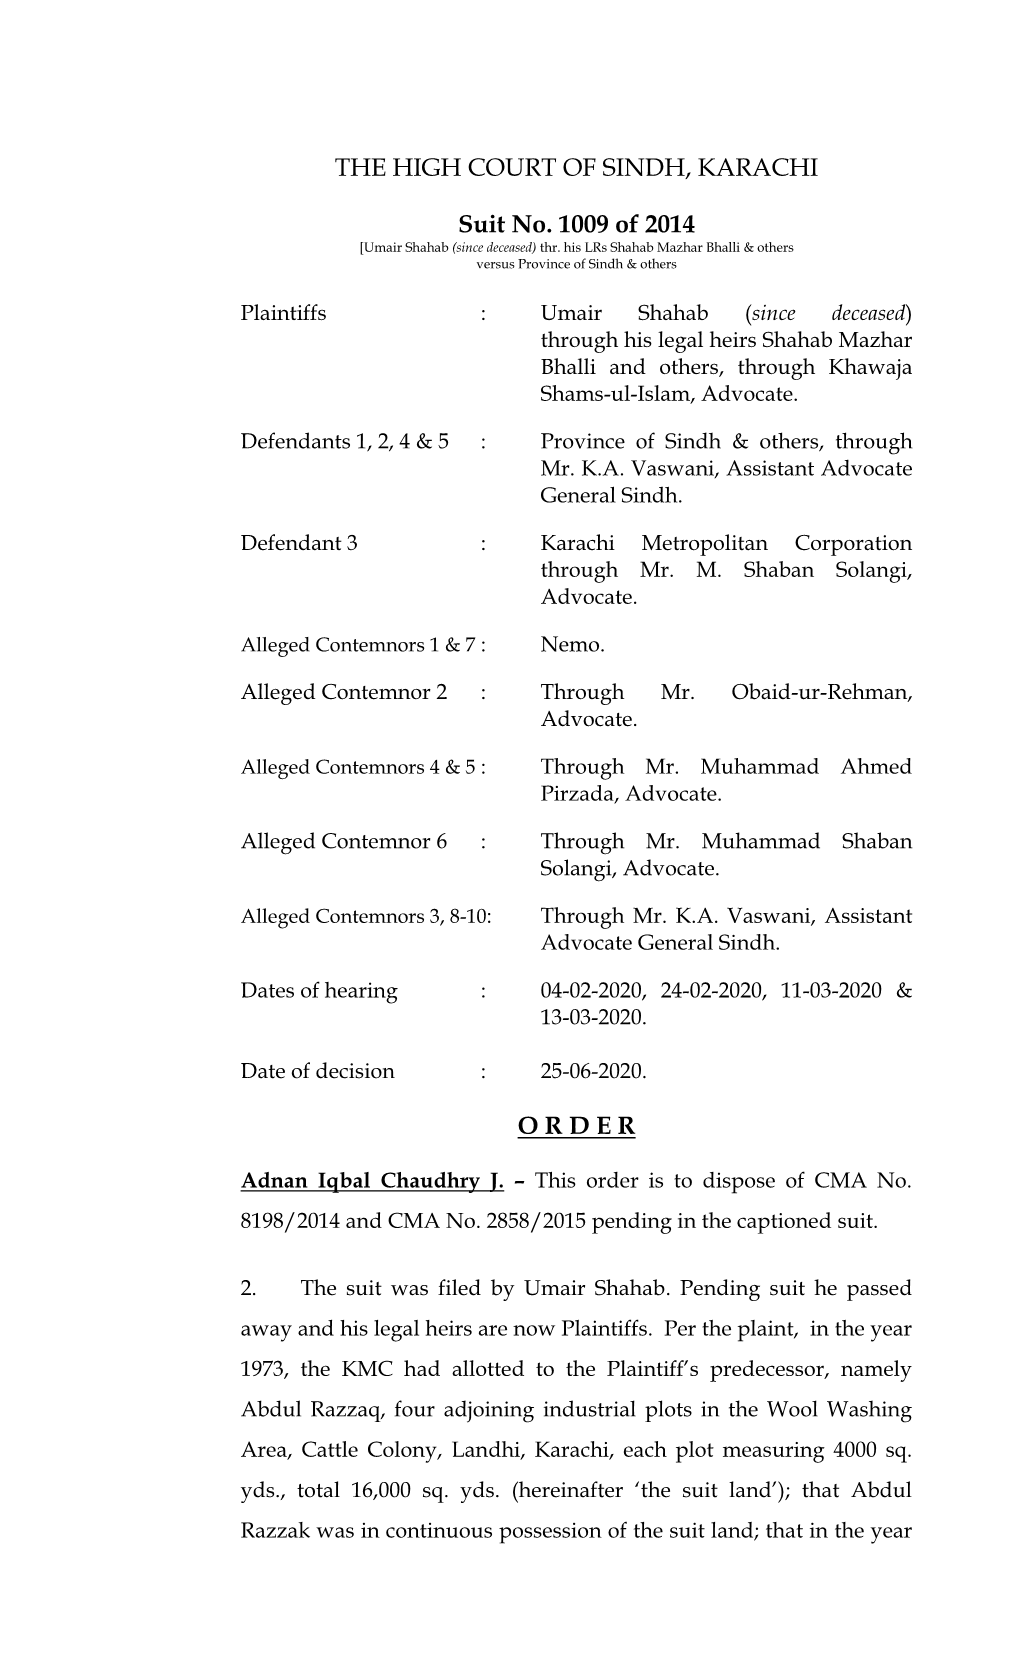 THE HIGH COURT of SINDH, KARACHI Suit No. 1009 of 2014